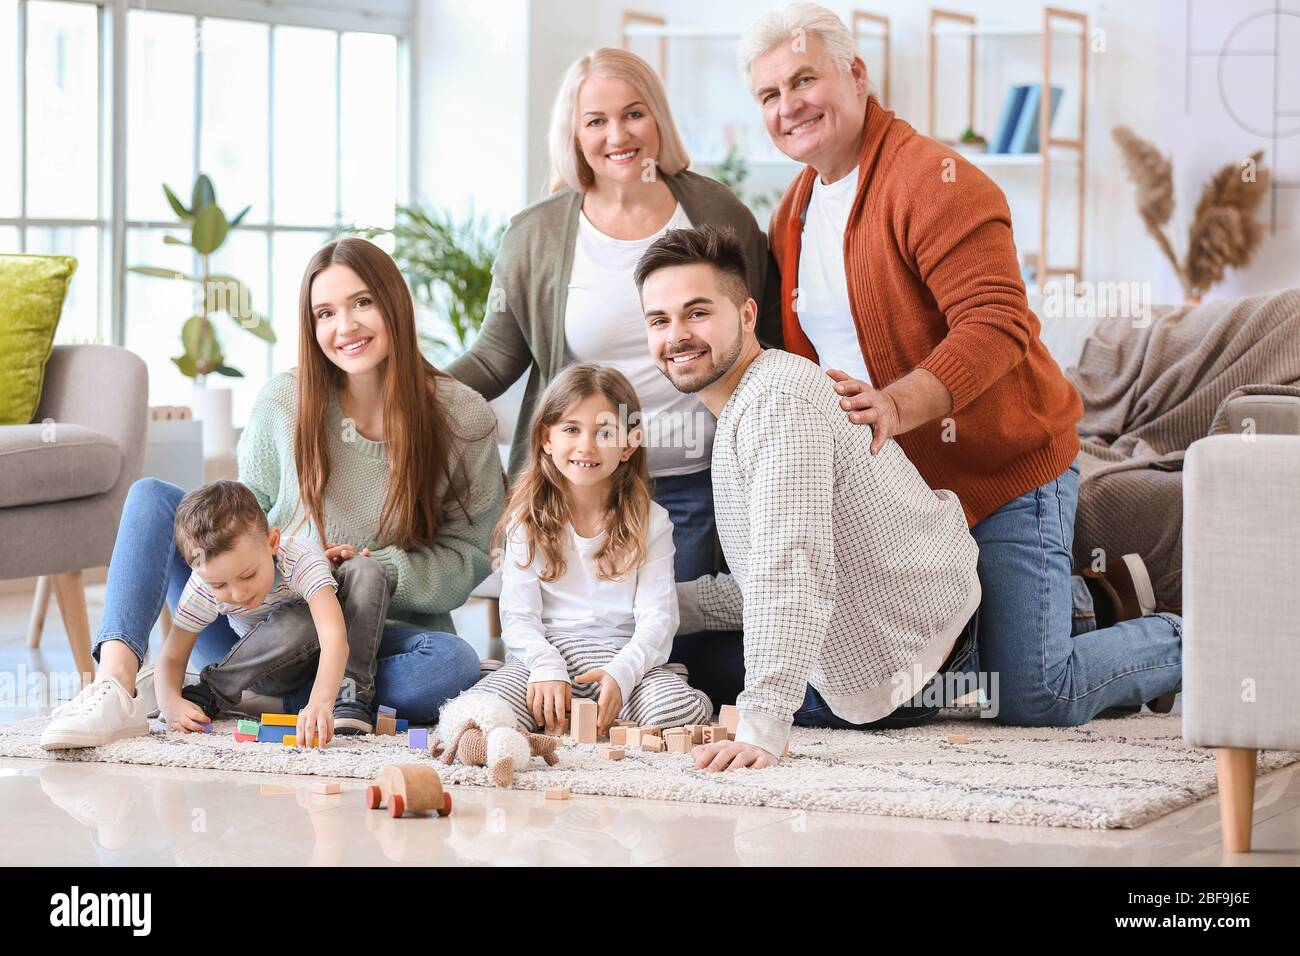 Big family spending time together at home Stock Photo